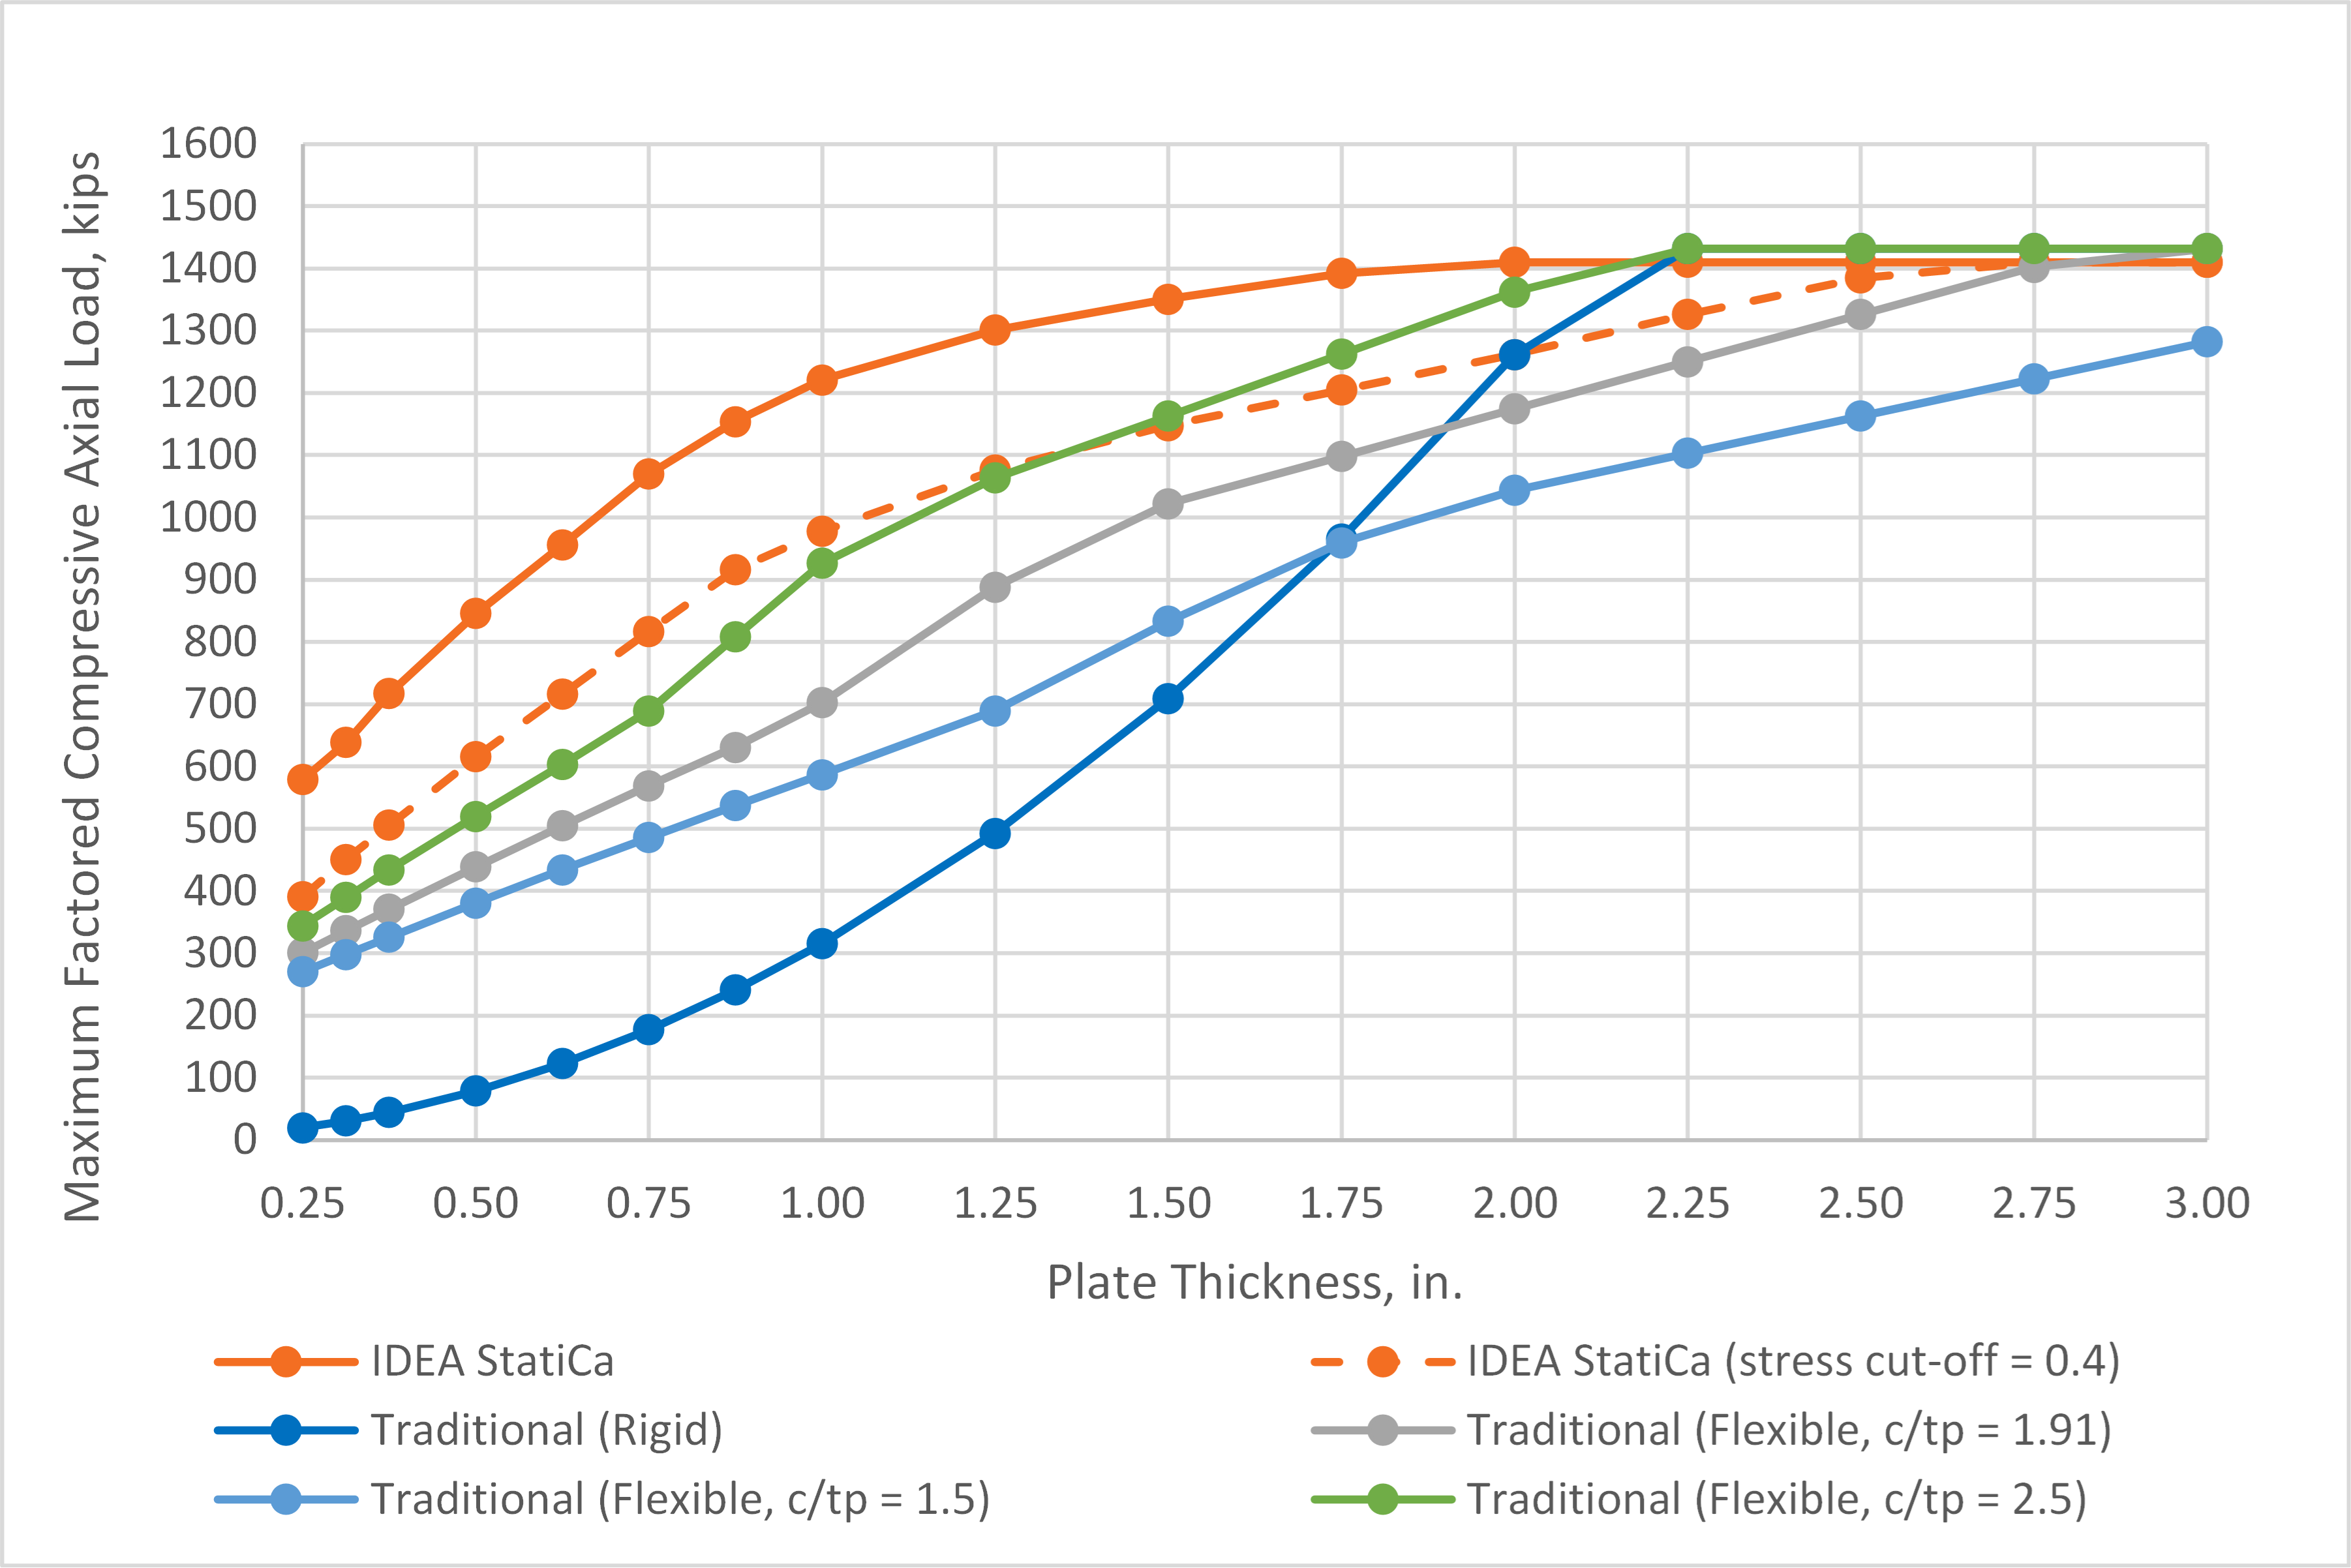 Maximum factored compressive axial load vs. plate thickness for base plate with wide flange column including traditional calculations with flexible base plate